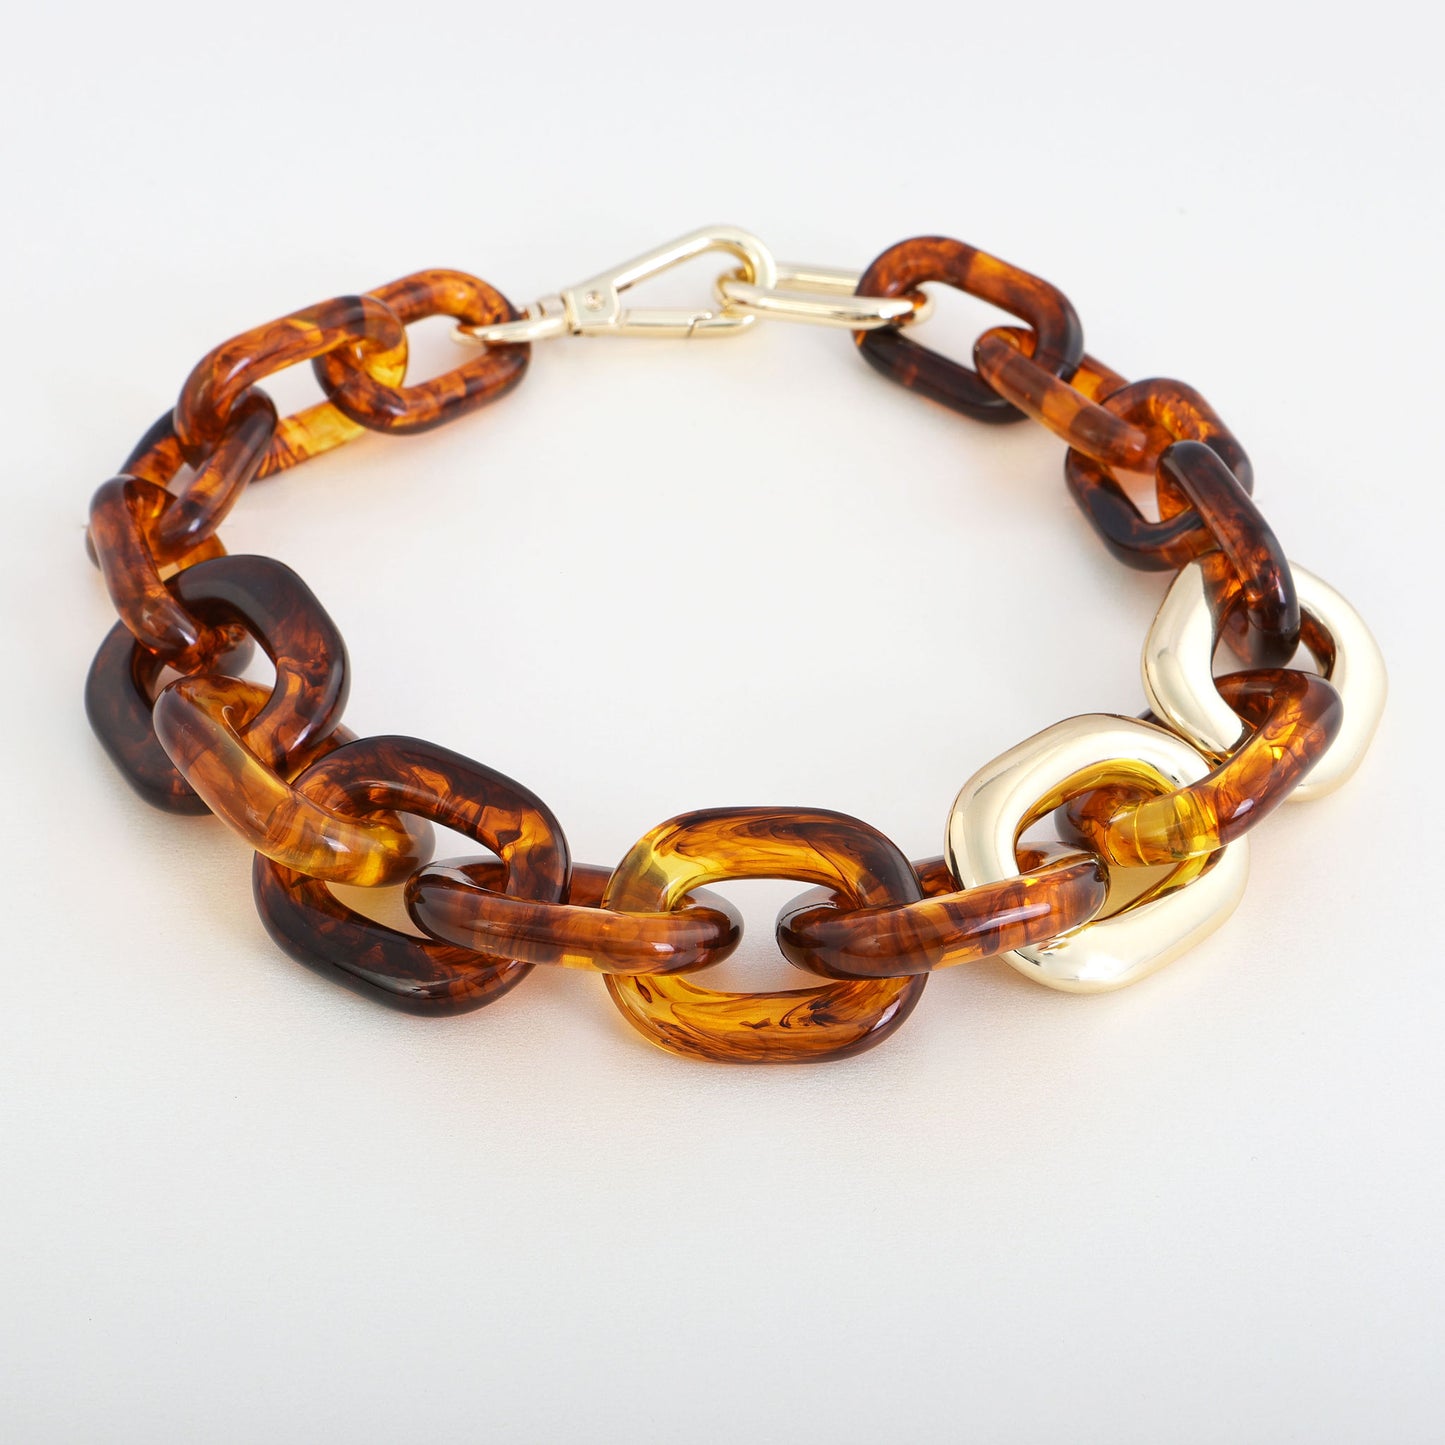 Statement and stylish chunky amber tortoise link chain necklace